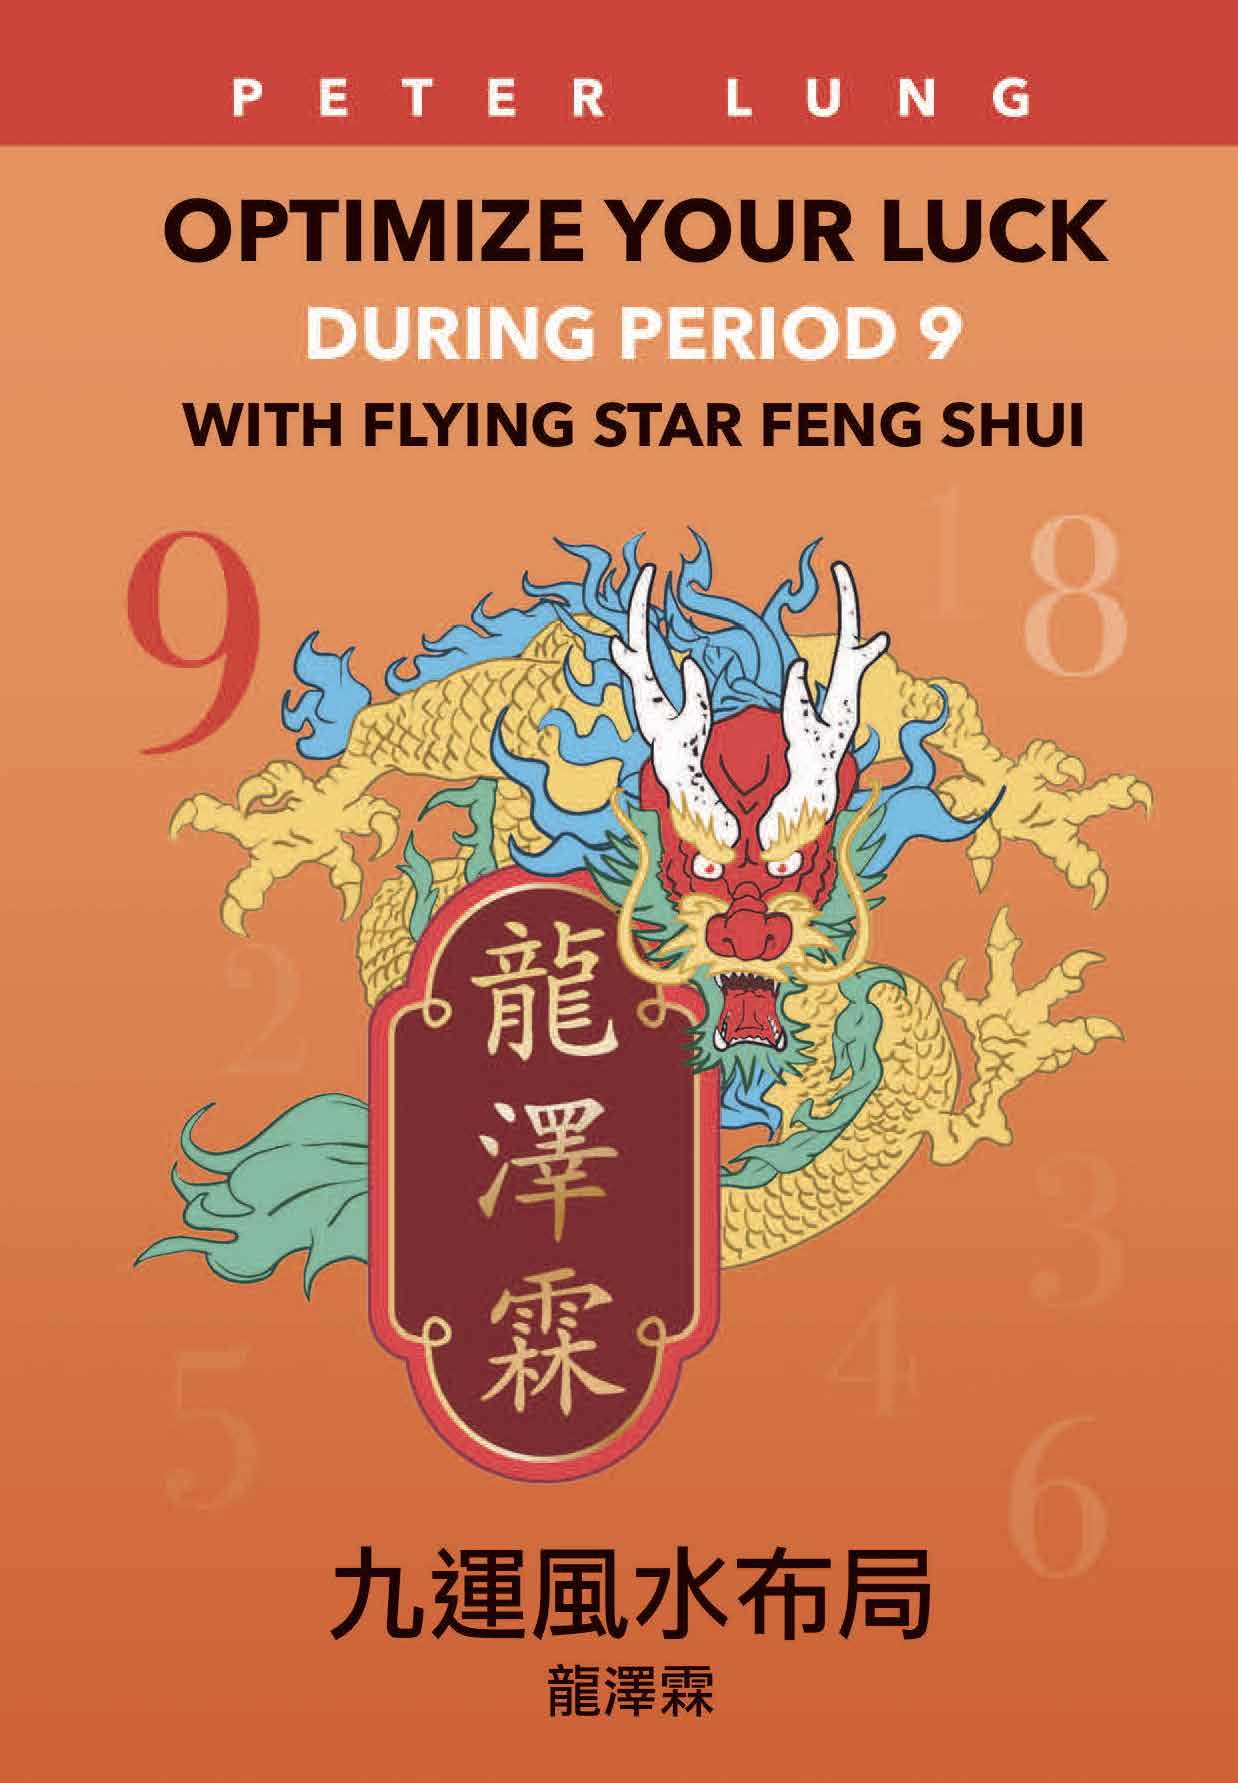 Optimize Your Luck During Period 9 - Flying Star Feng Shui By Peter Lung